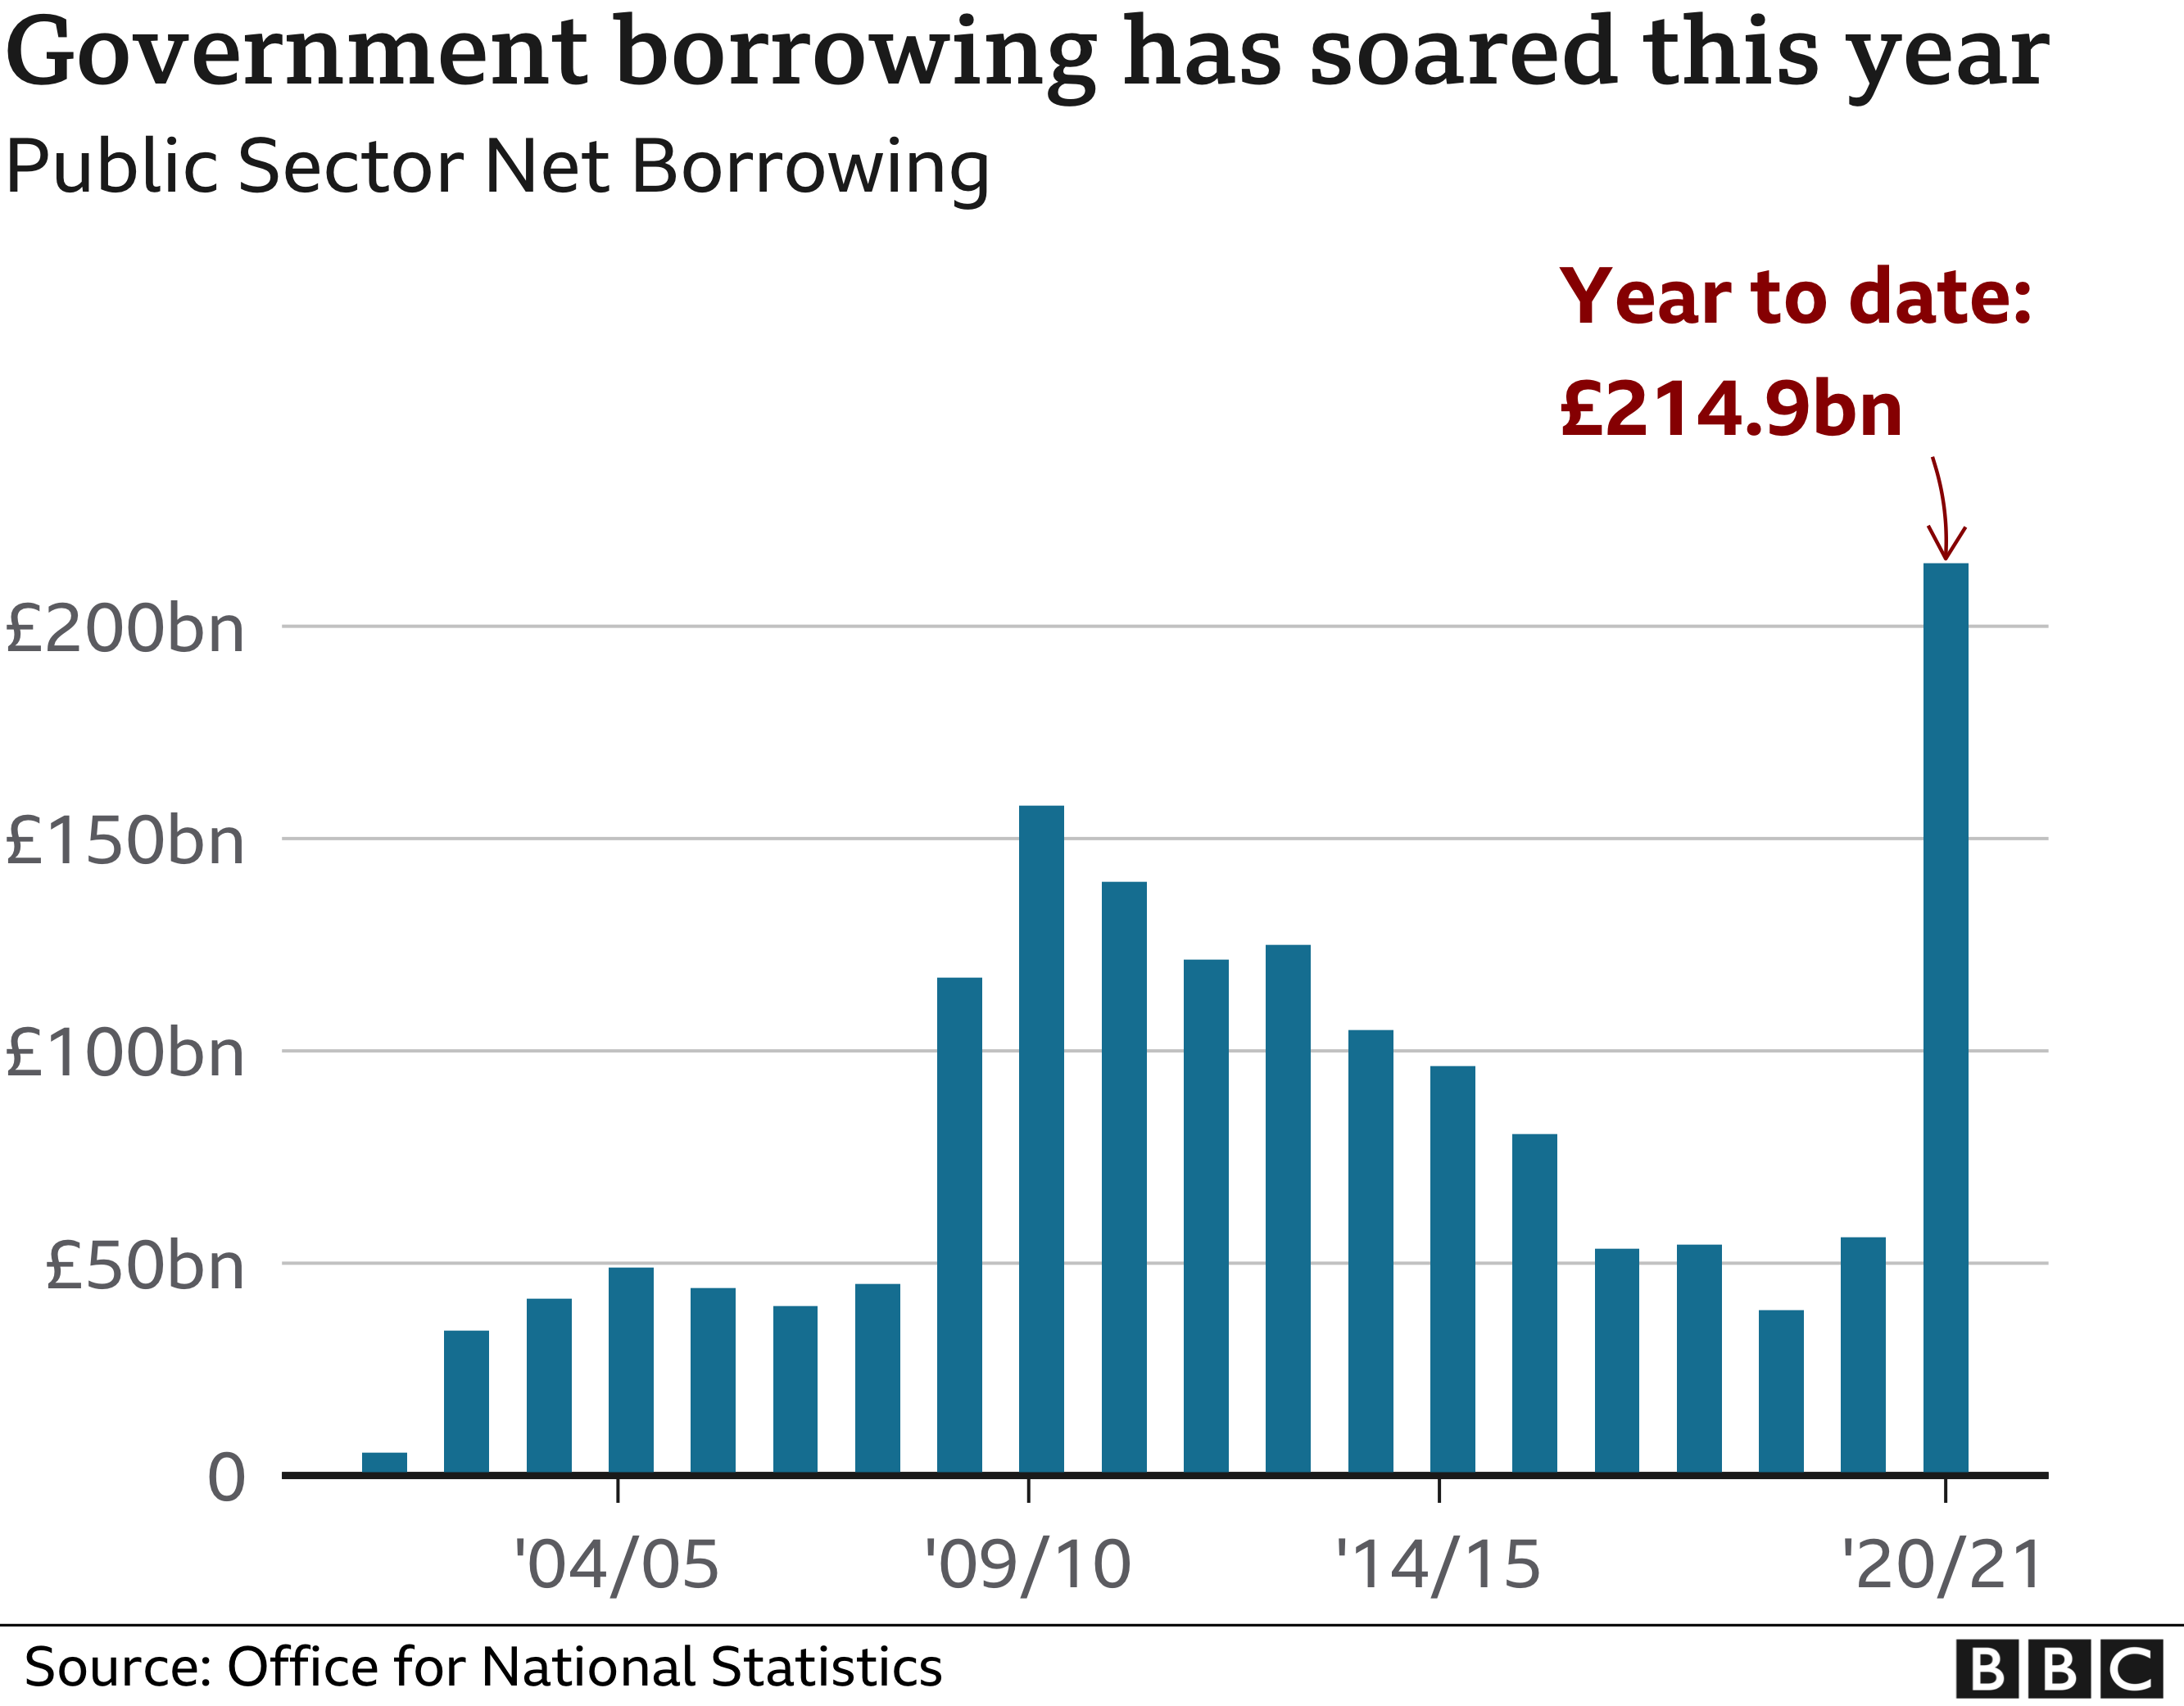 Graph of government spending by year, rising to £215bn in 2020/21